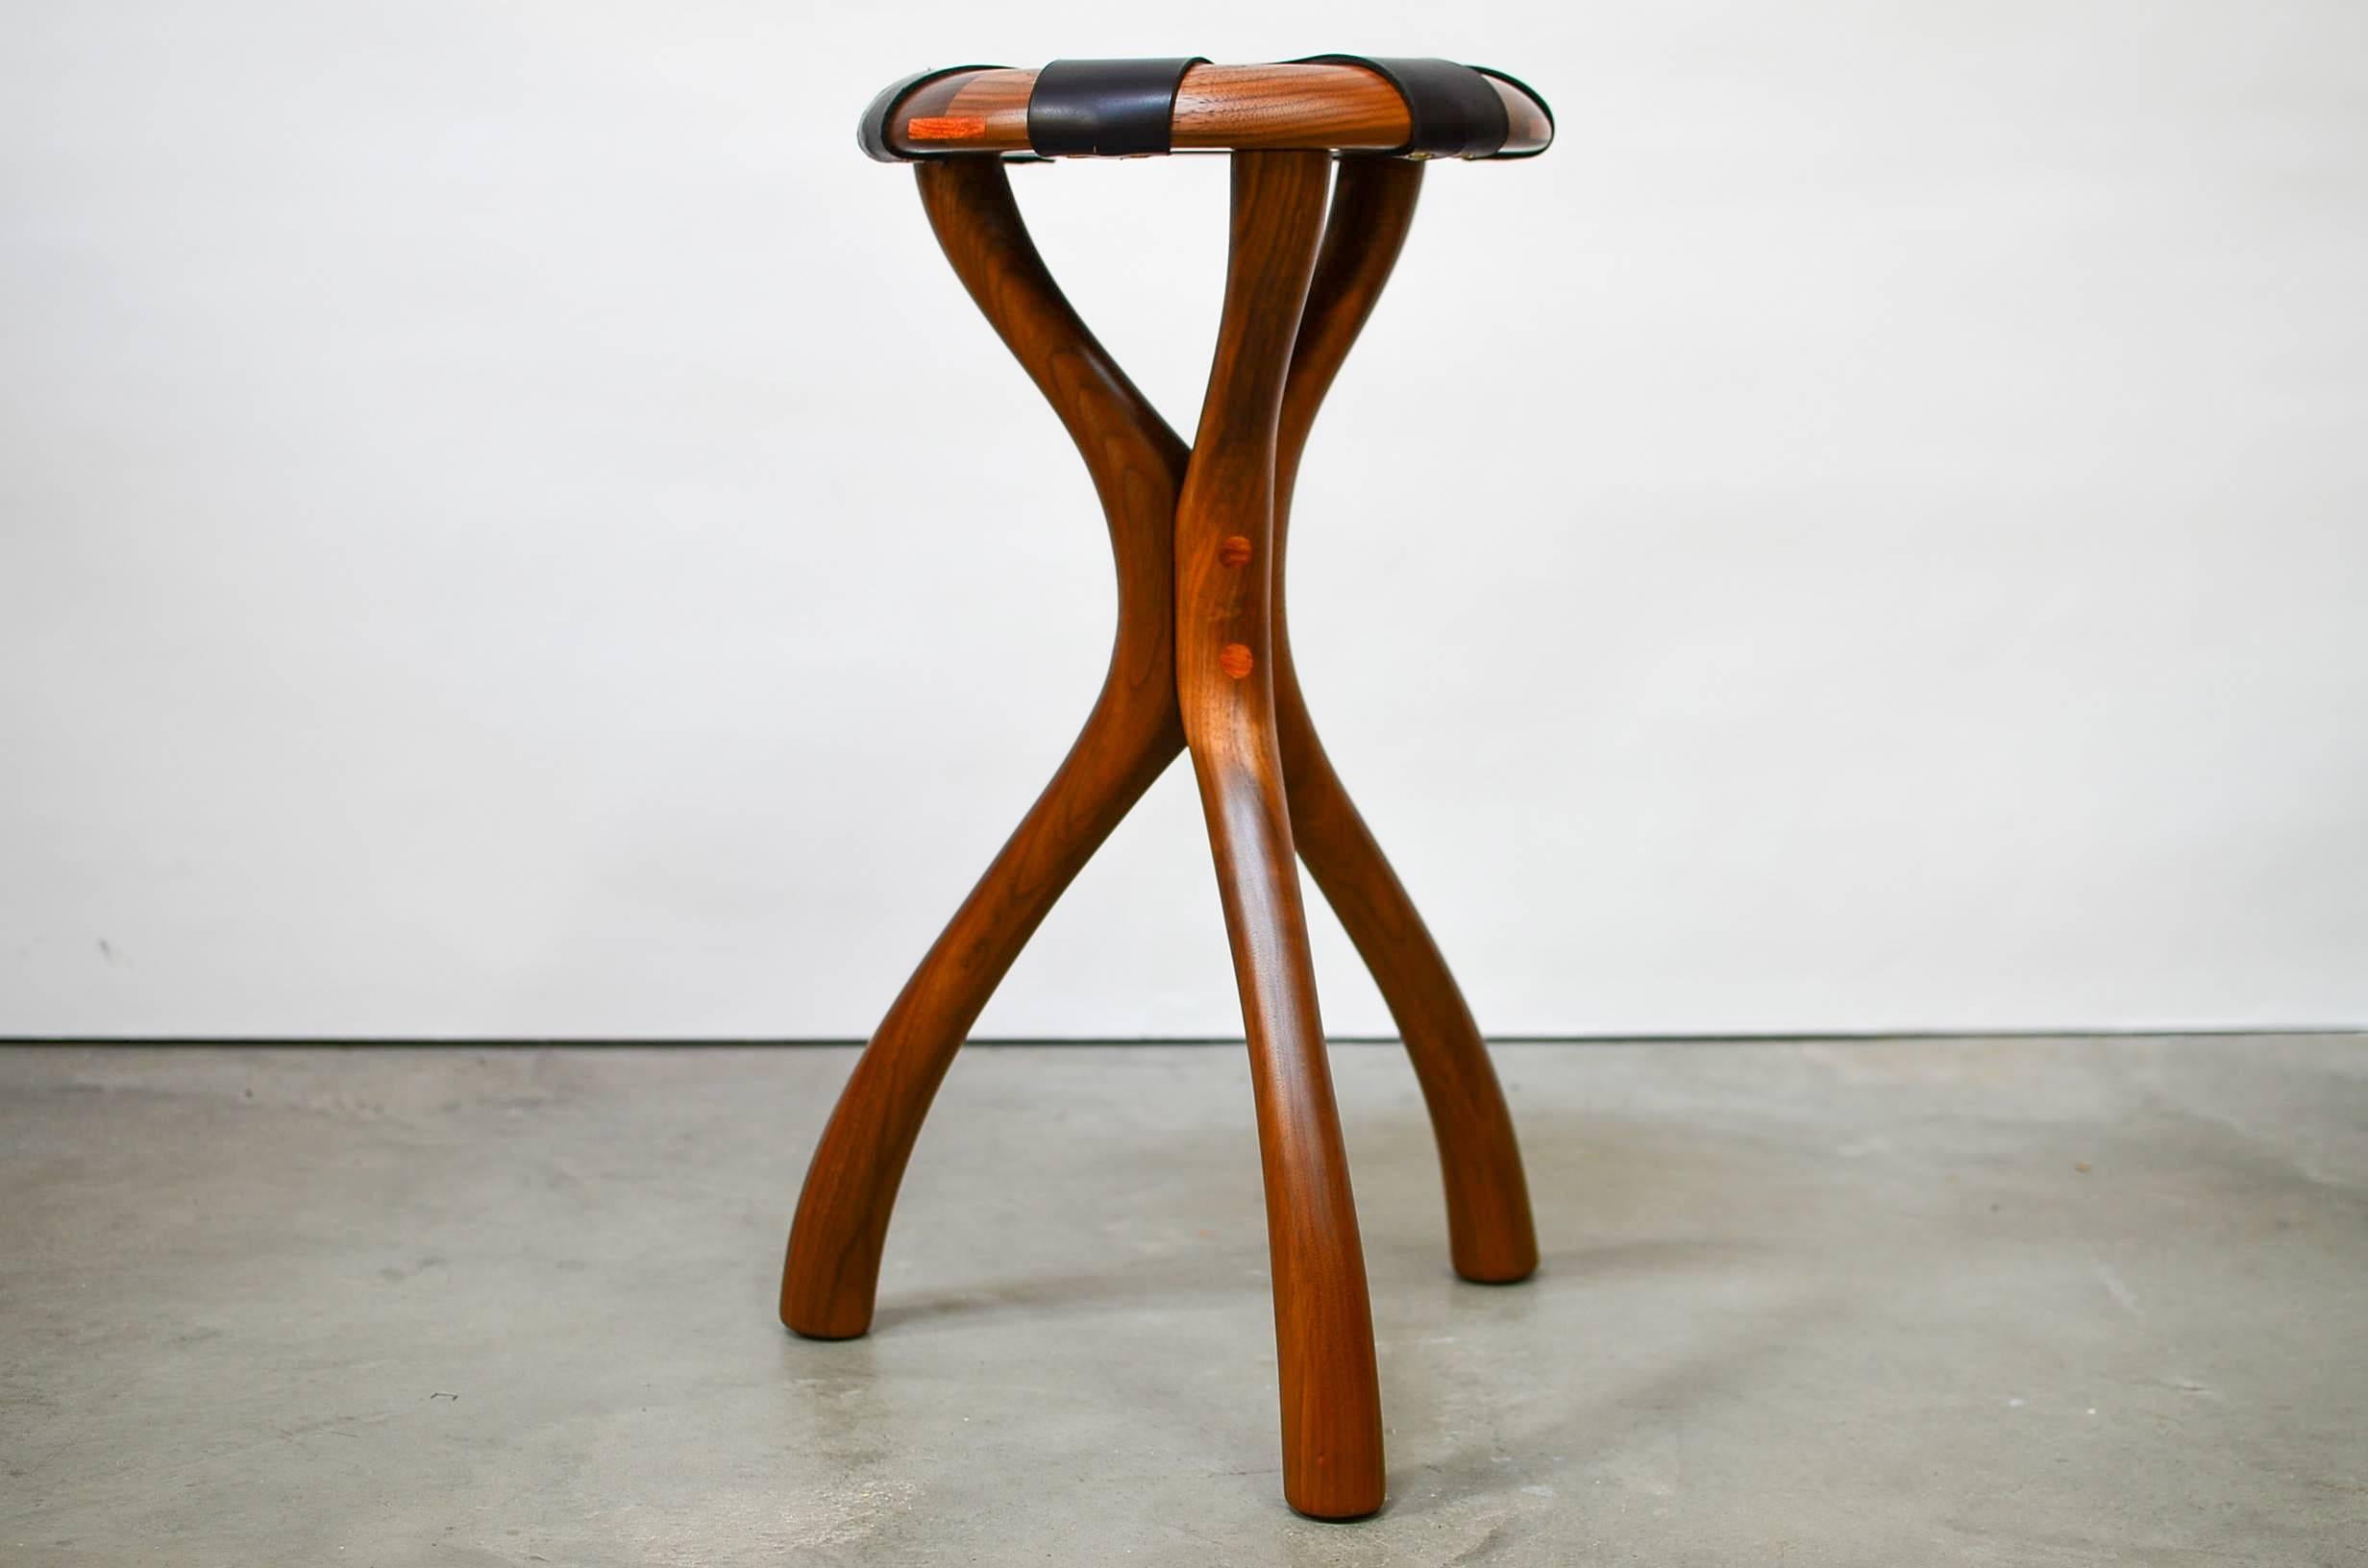 Stunning black walnut and leather strapped stool with bubinga details designed by Master Craftsman, Dean Santner. 

Dean originally designed this stool in 1969, but only one was made.

Up to 12 stools are available for custom order. Other